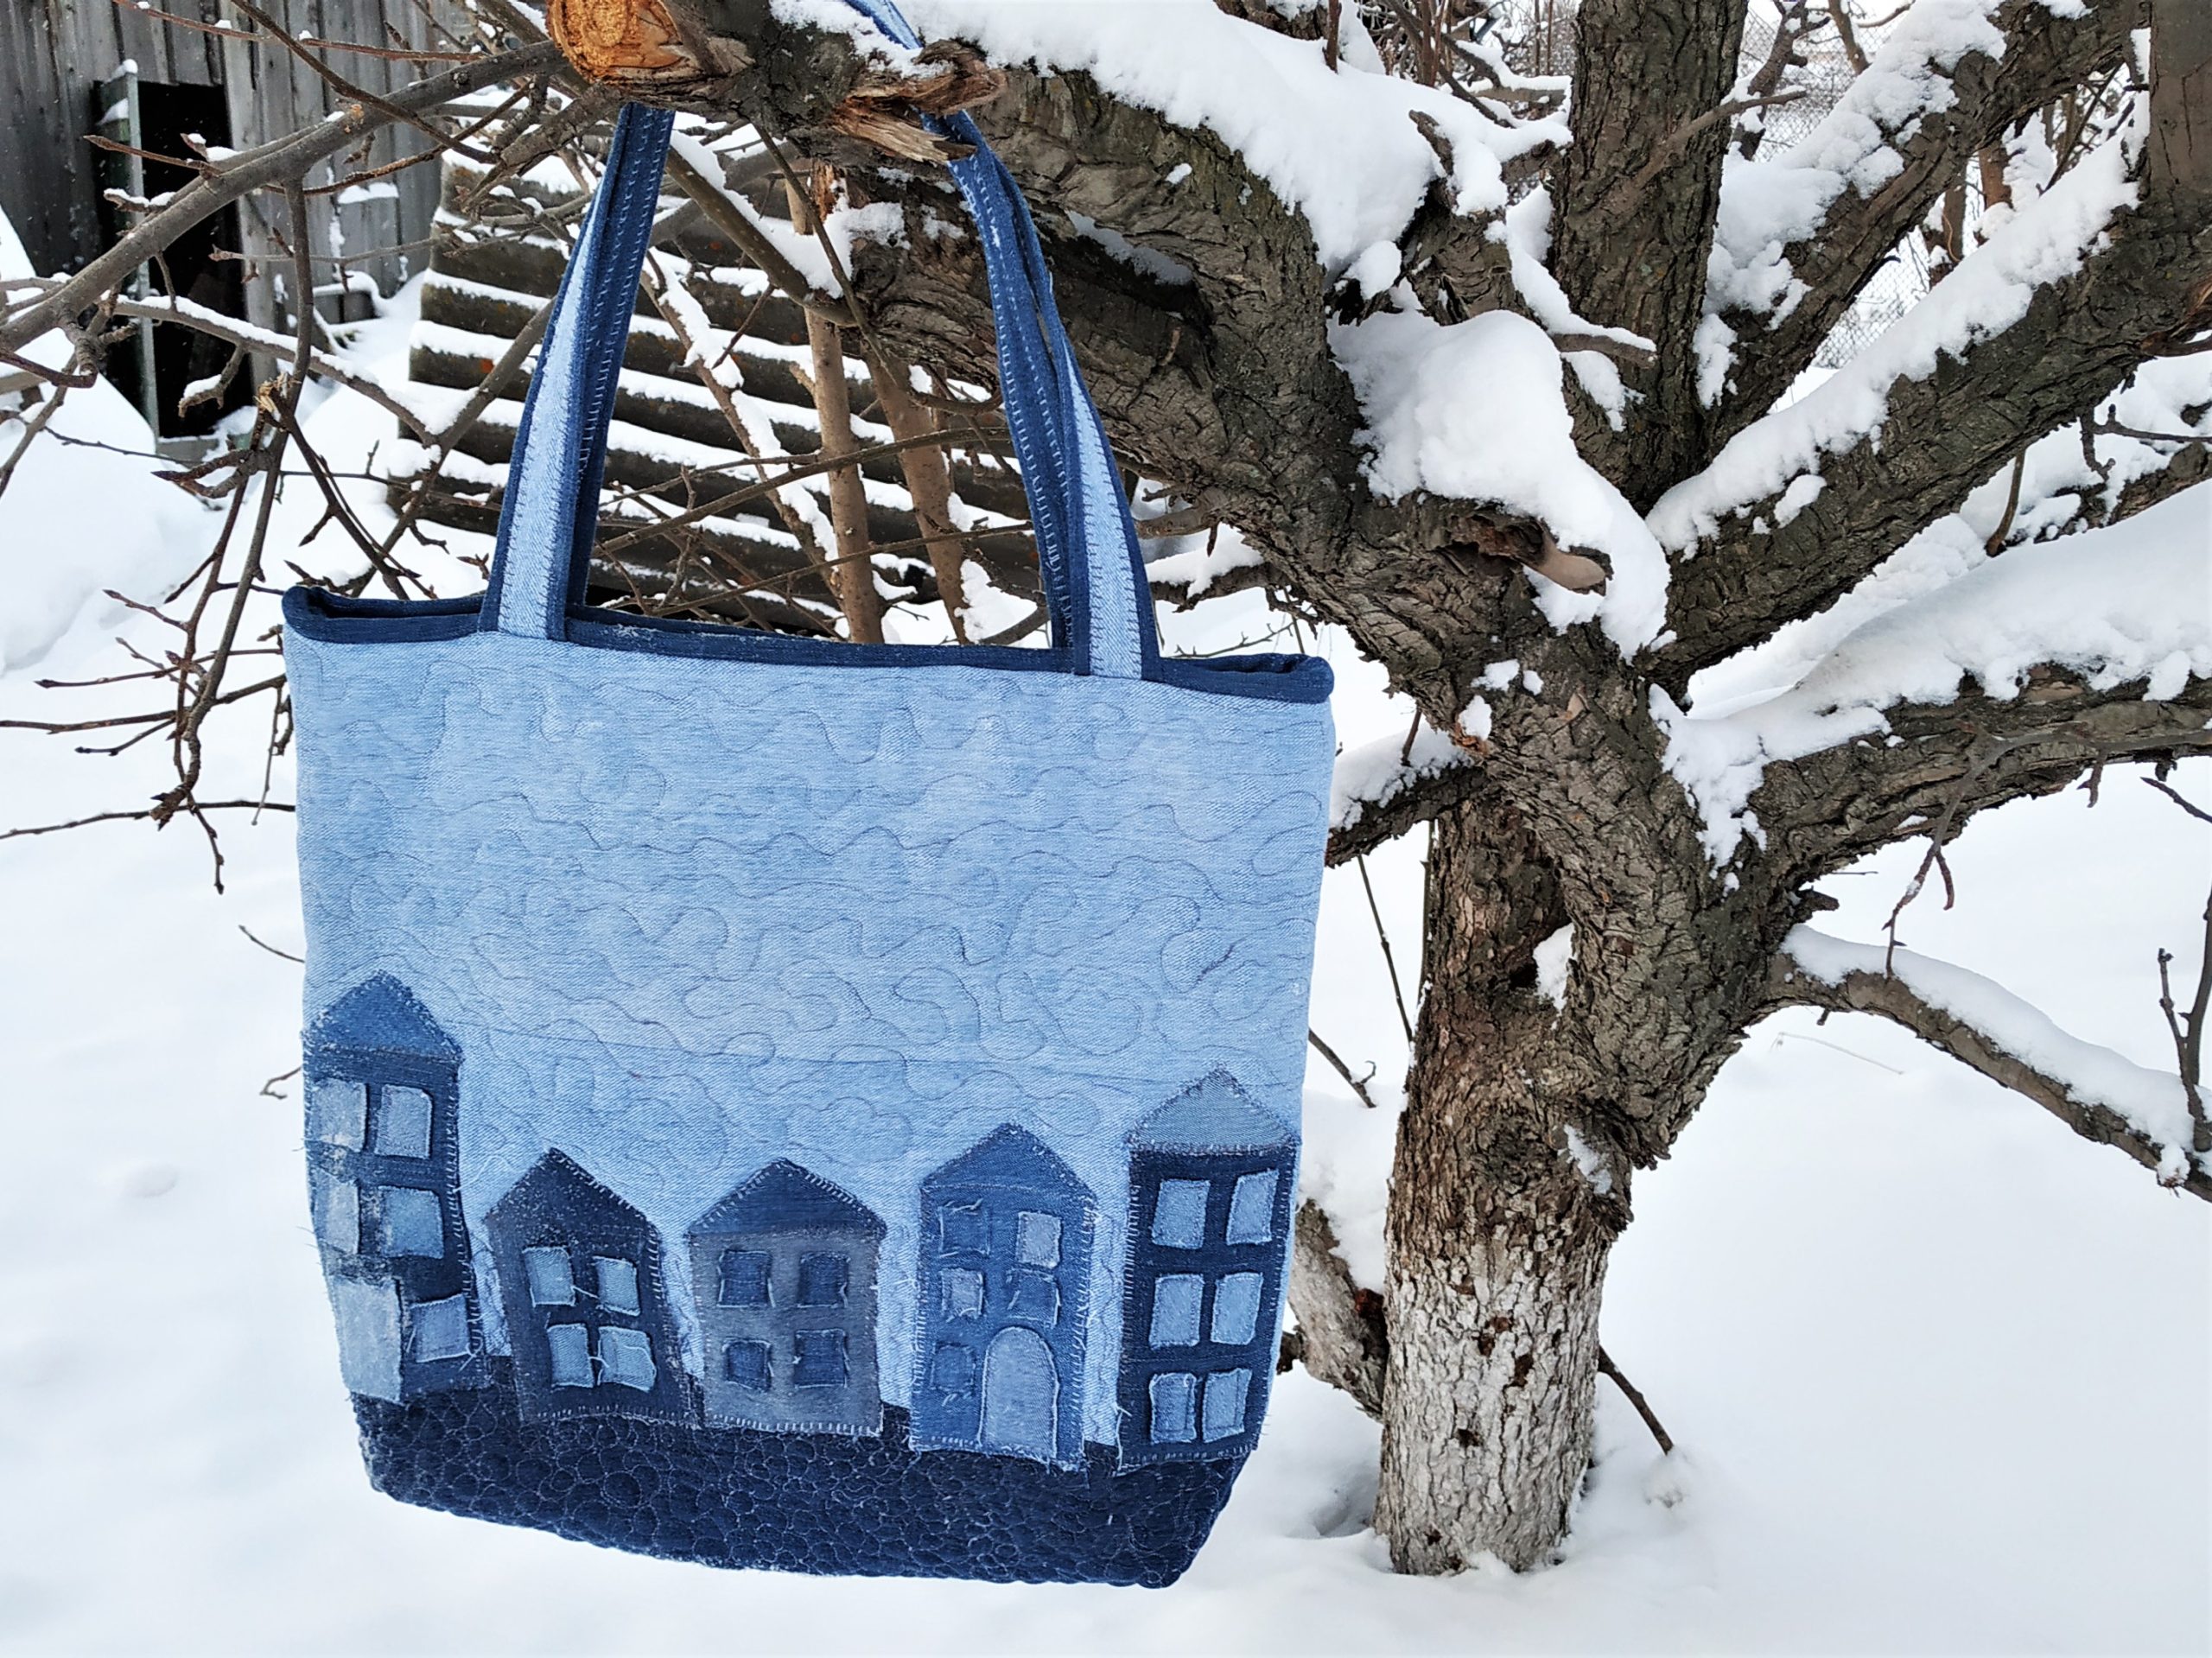 Upcycled Denim Tote Bag Project - The Sewing Directory